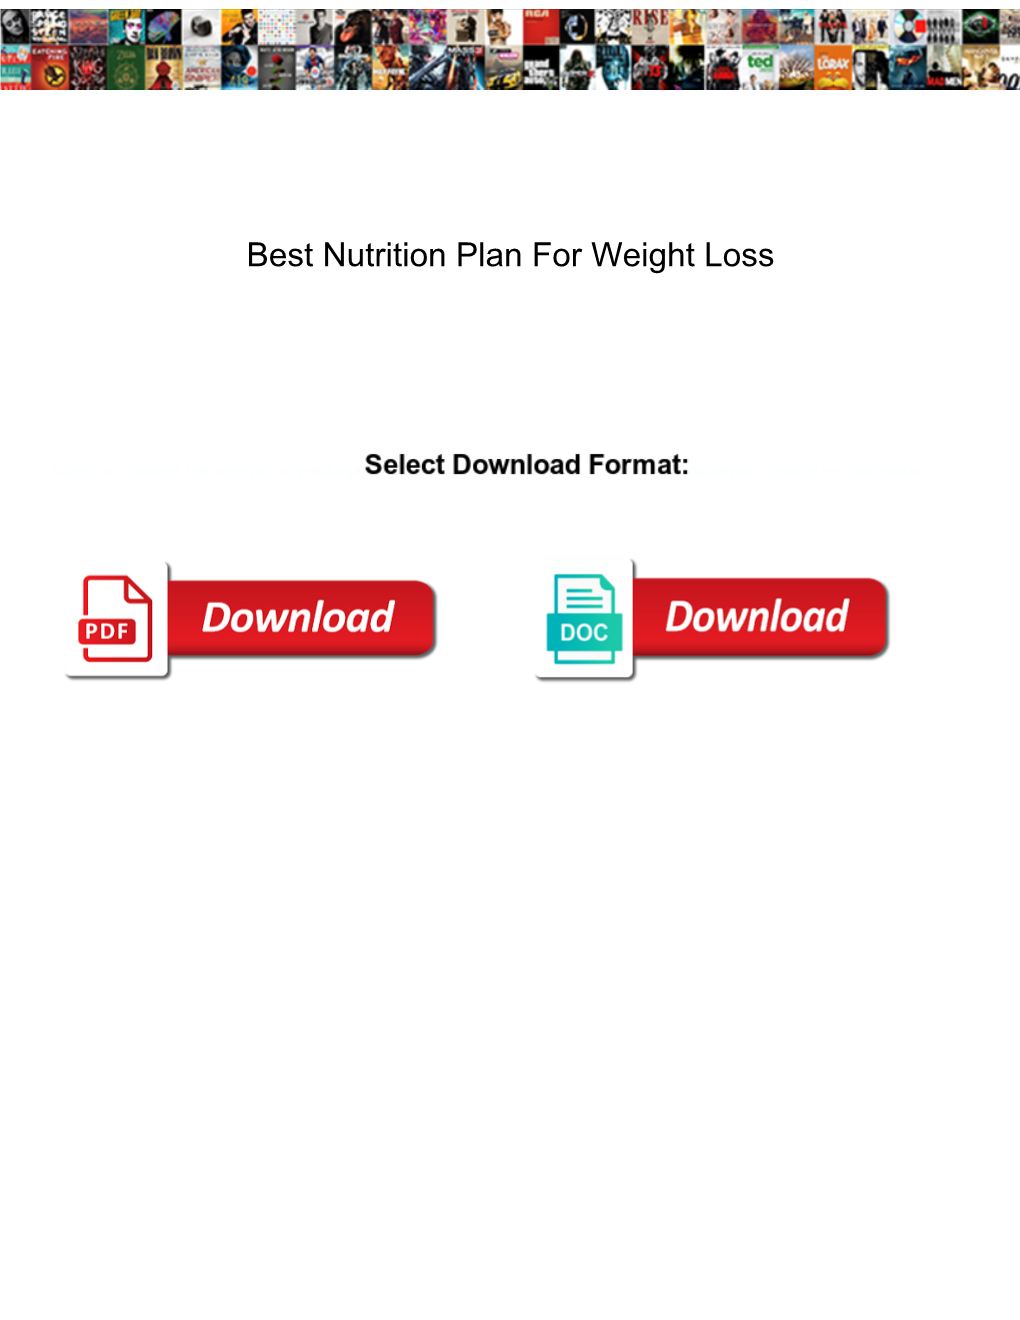 Best Nutrition Plan for Weight Loss